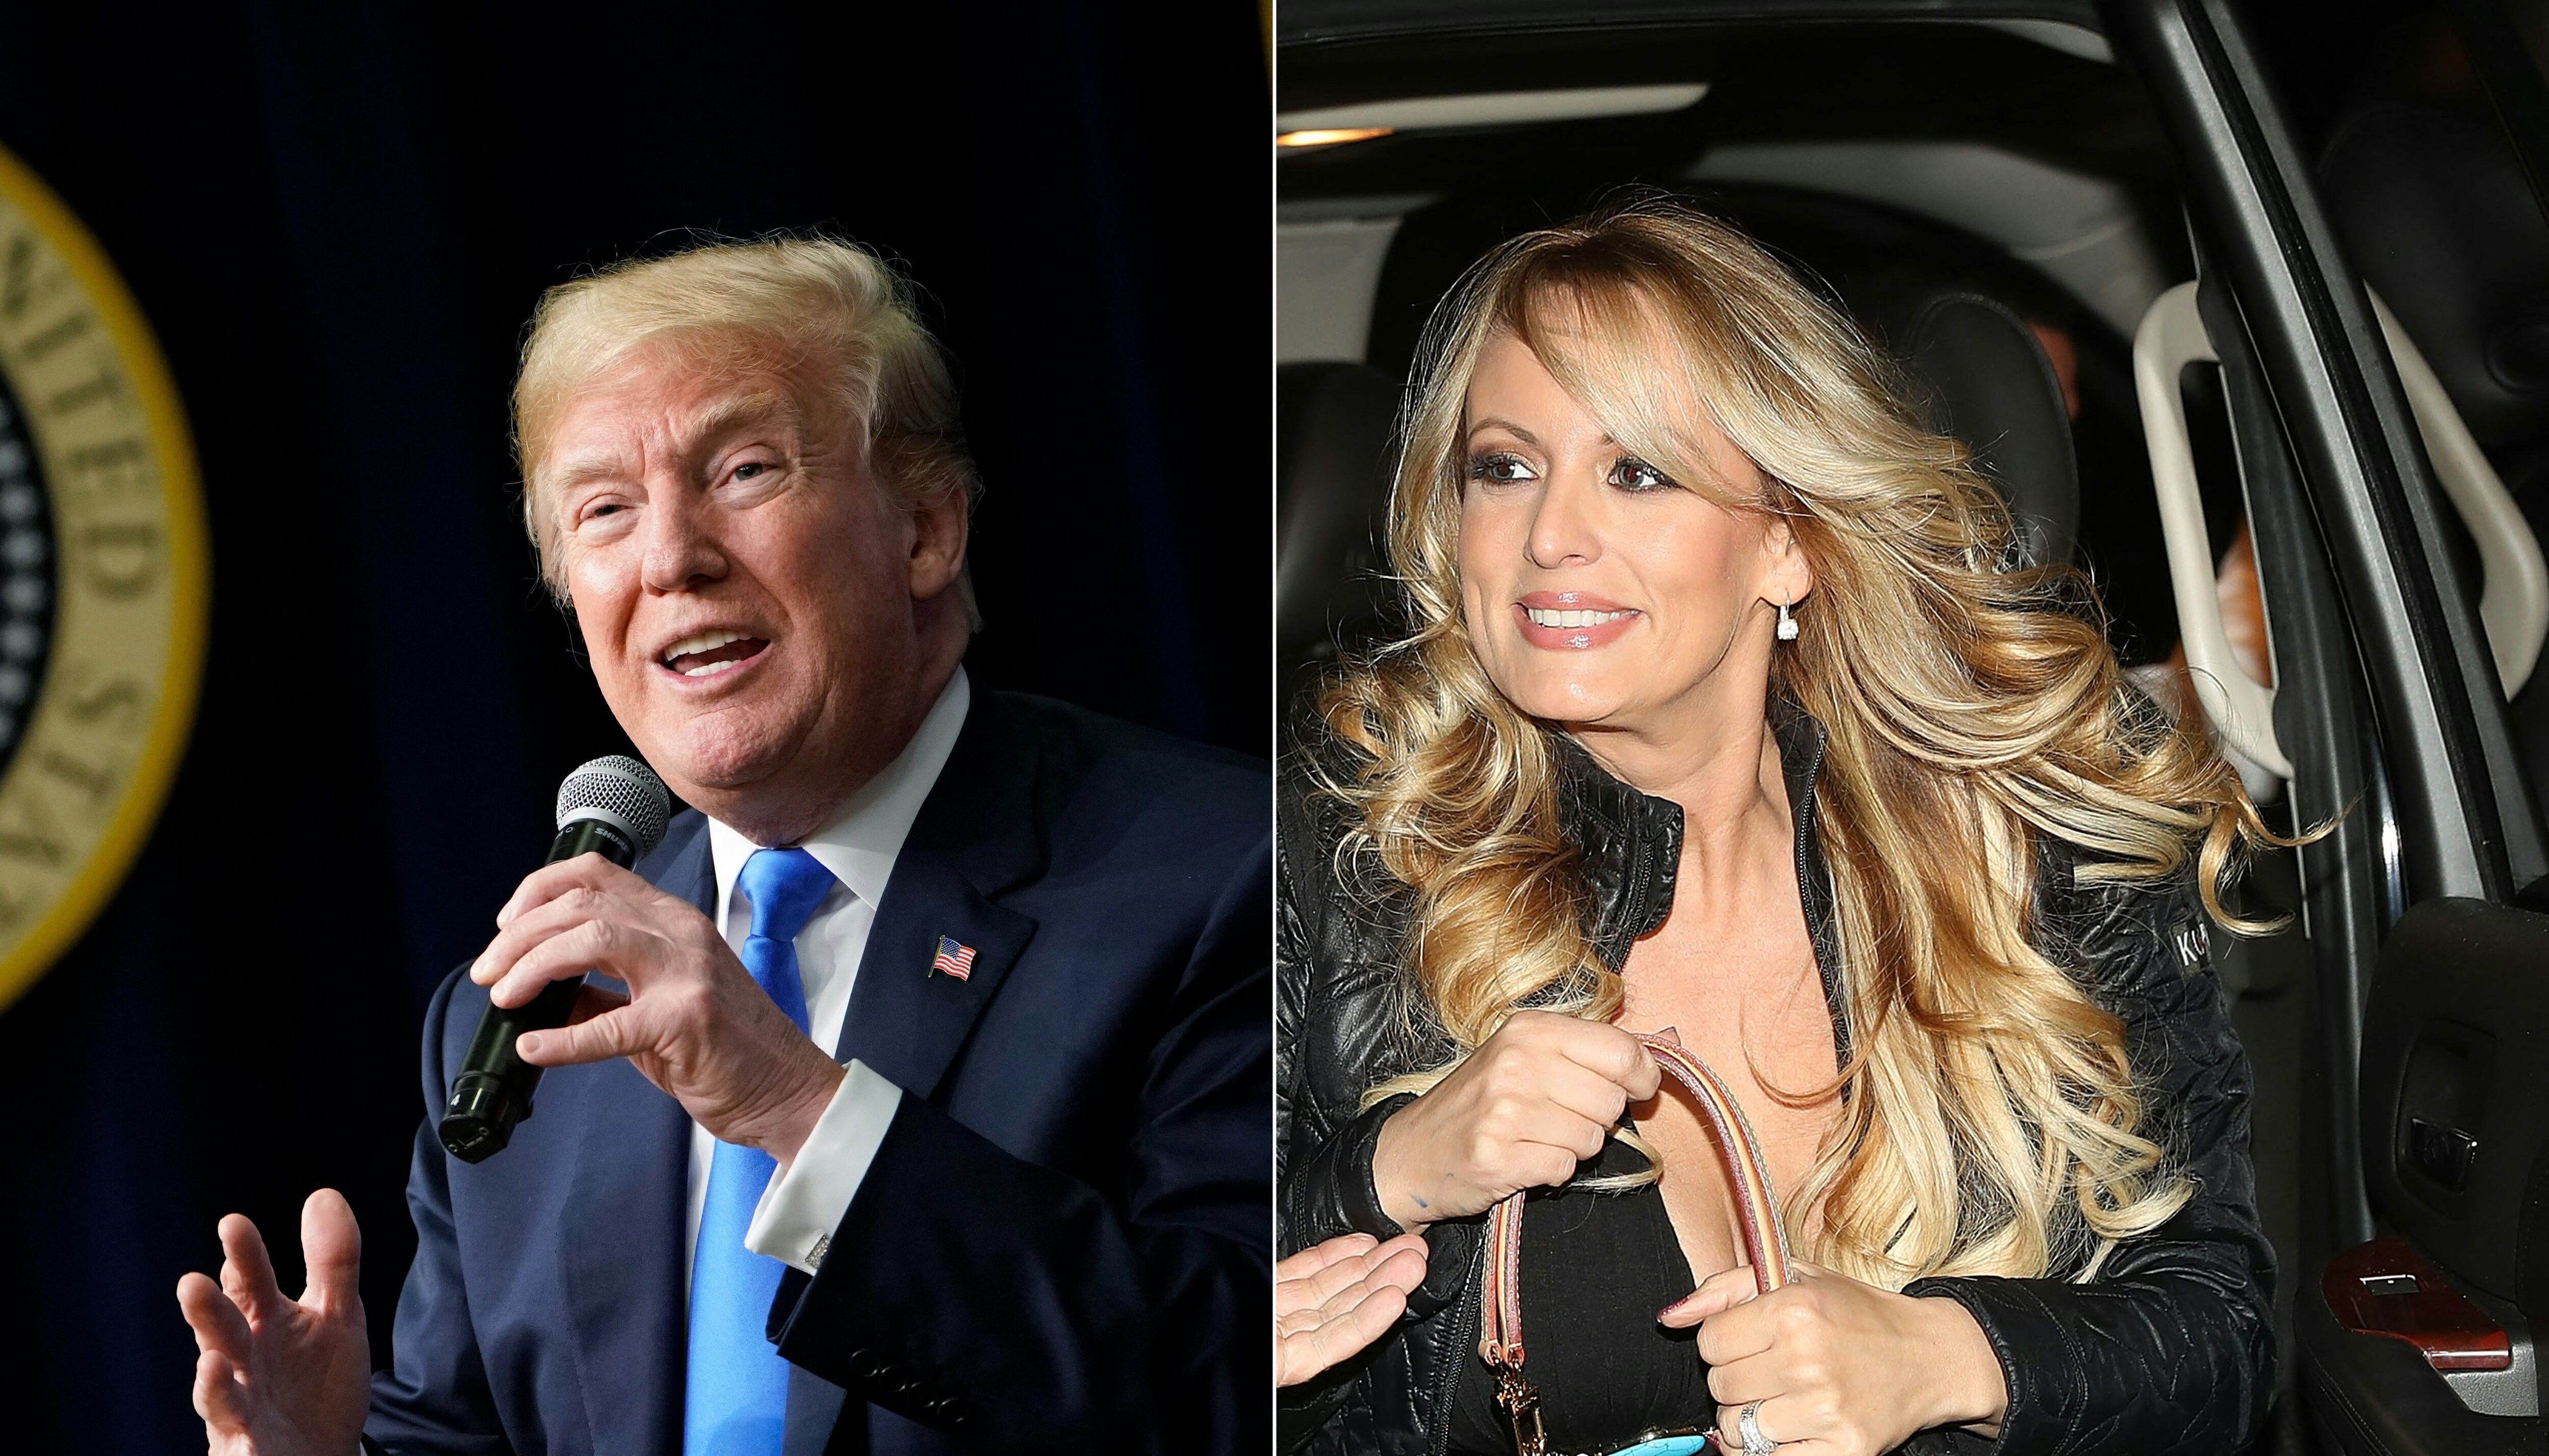 This image combination created on March 27, 2018 shows Donald Trump and Stormy Daniels.  (Photos by MANDEL NGAN and JOE RAEDLE/AFP).